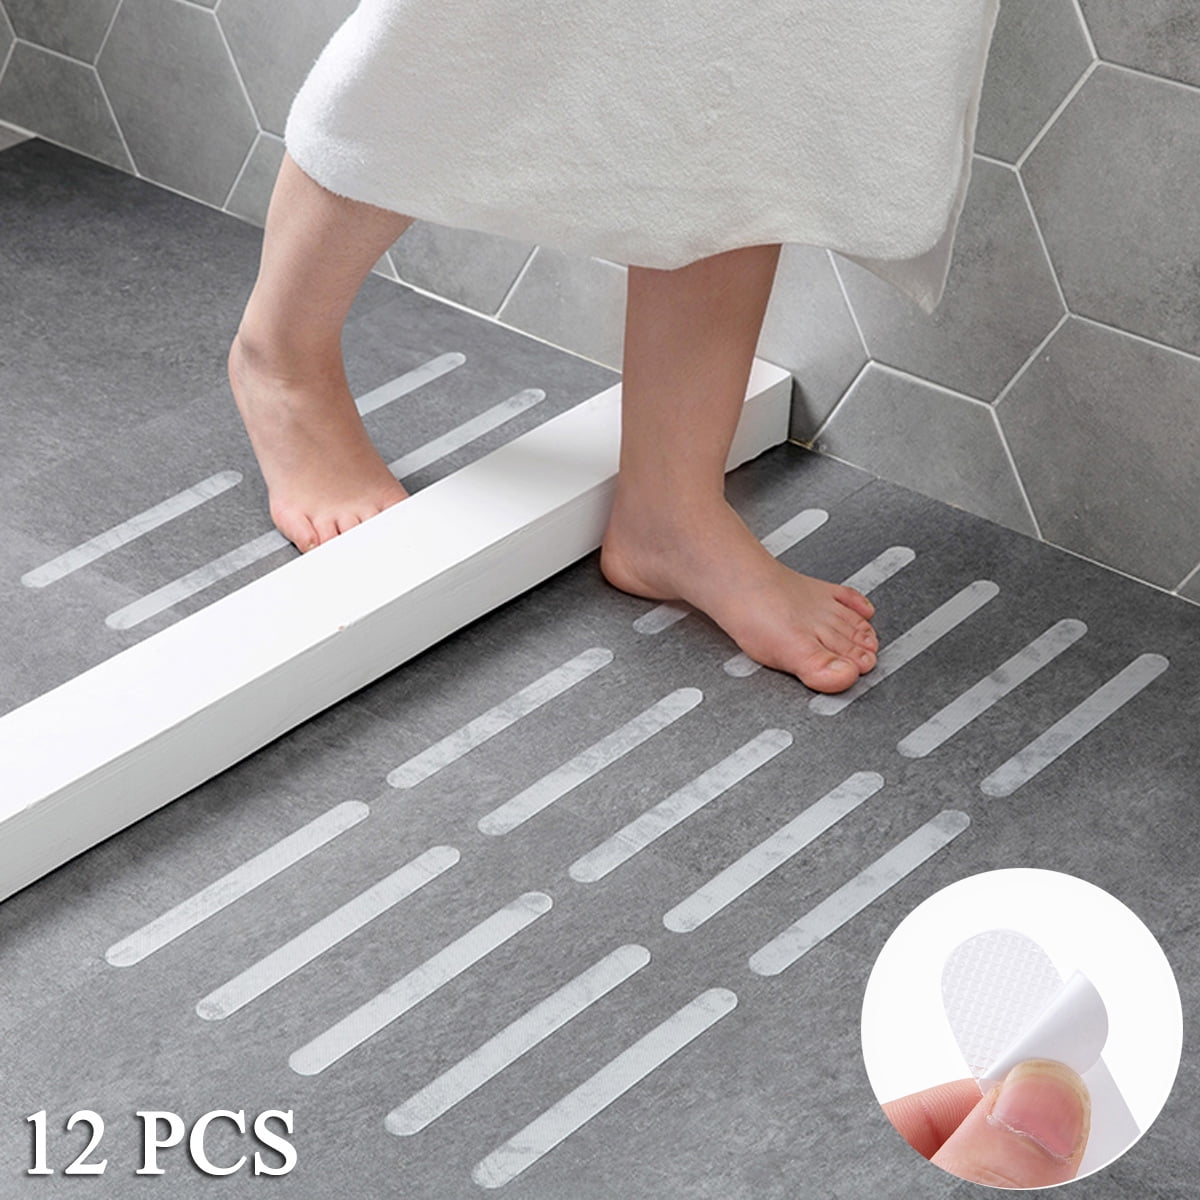 Details about   Useful 4 X Carpet Pad Double-sided adhesive Sticker Anti Slip Mat Pads Anti Slip 